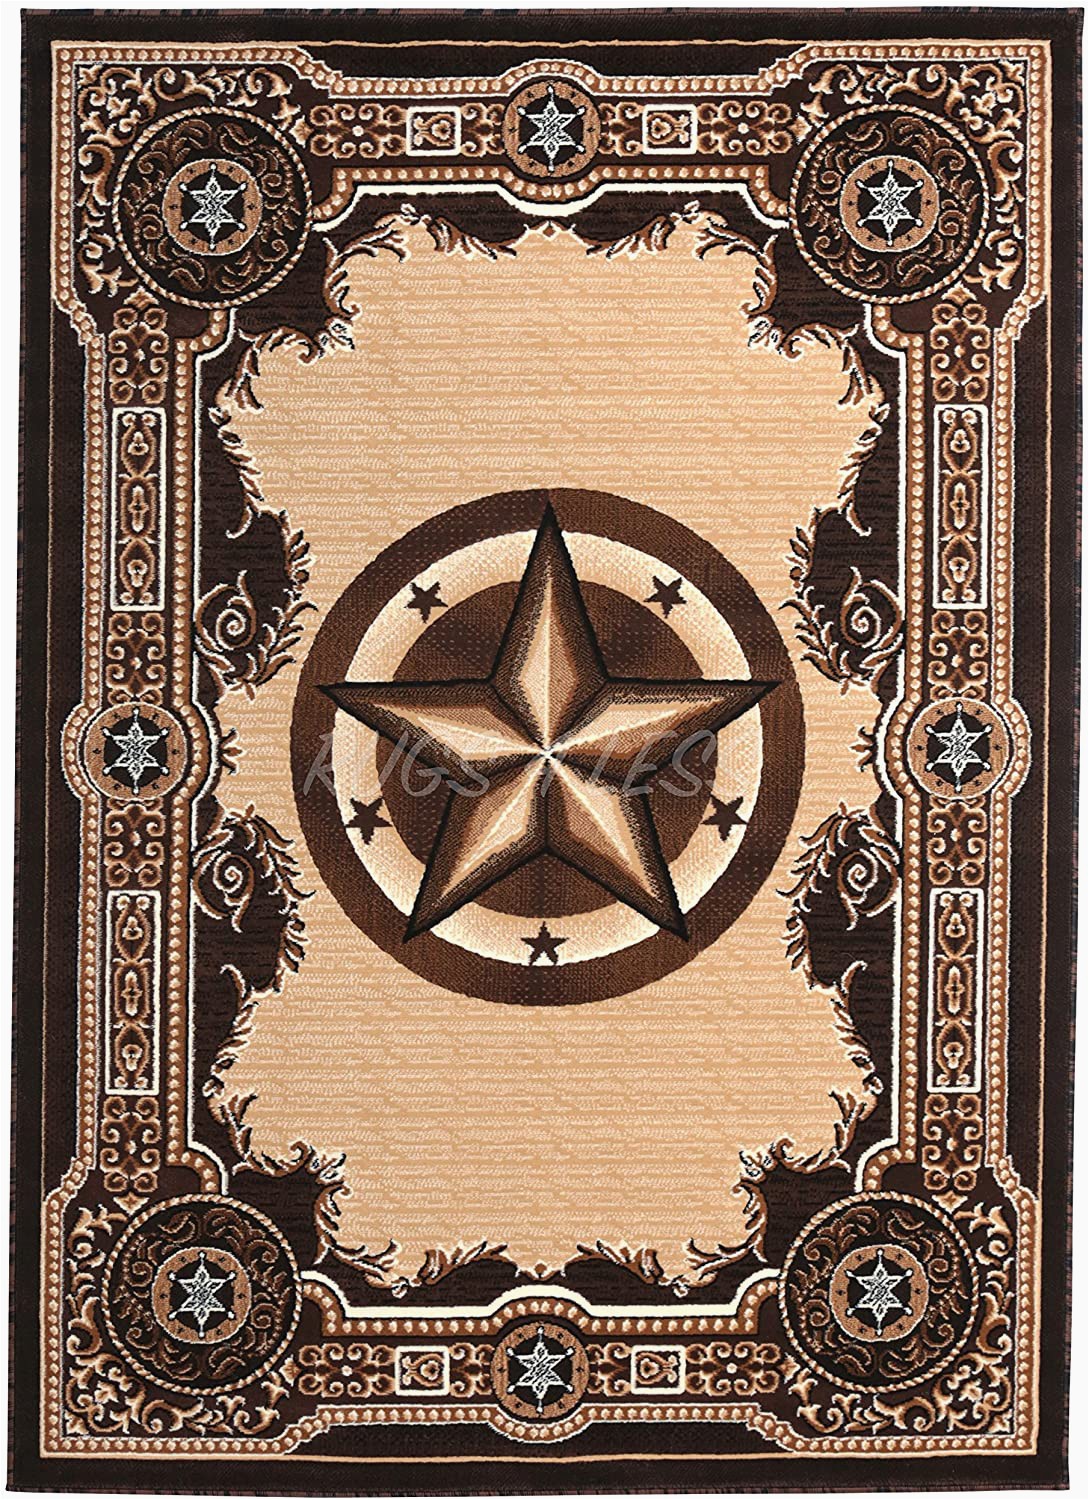 Rustic Texas Star area Rugs Rugs 4 Less Collection Texas Lone Star State Novelty area Rug Chocolate Brown 723 5 X7